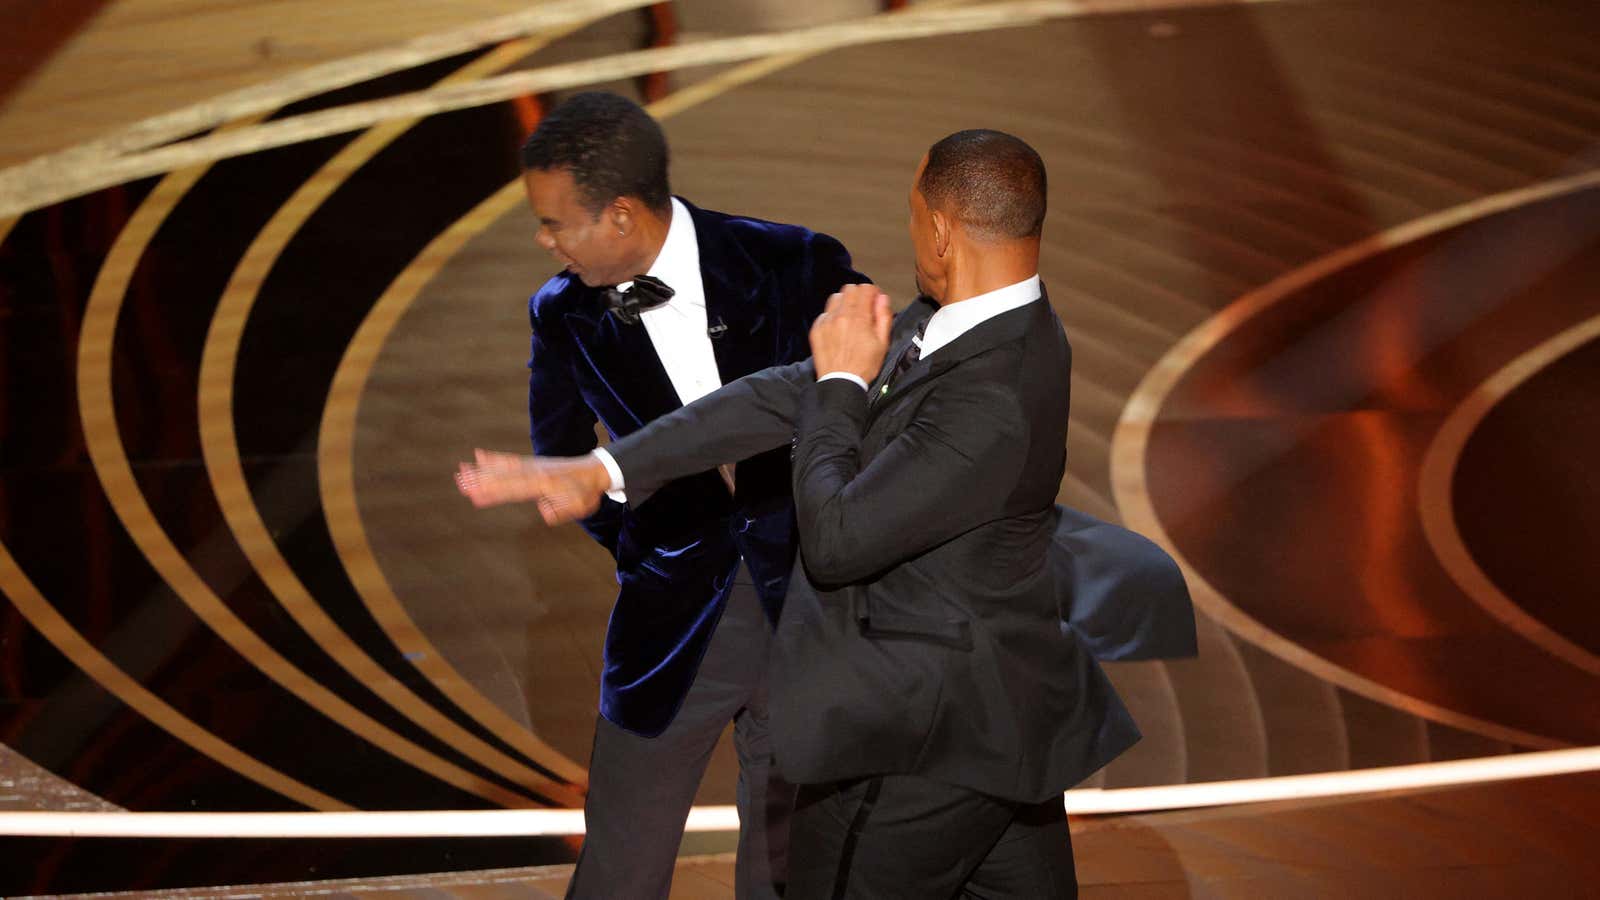 Will Smith (R) hits at Chris Rock as Rock spoke on stage during the 94th Academy Awards in Hollywood, Los Angeles, California, U.S., March 27,…